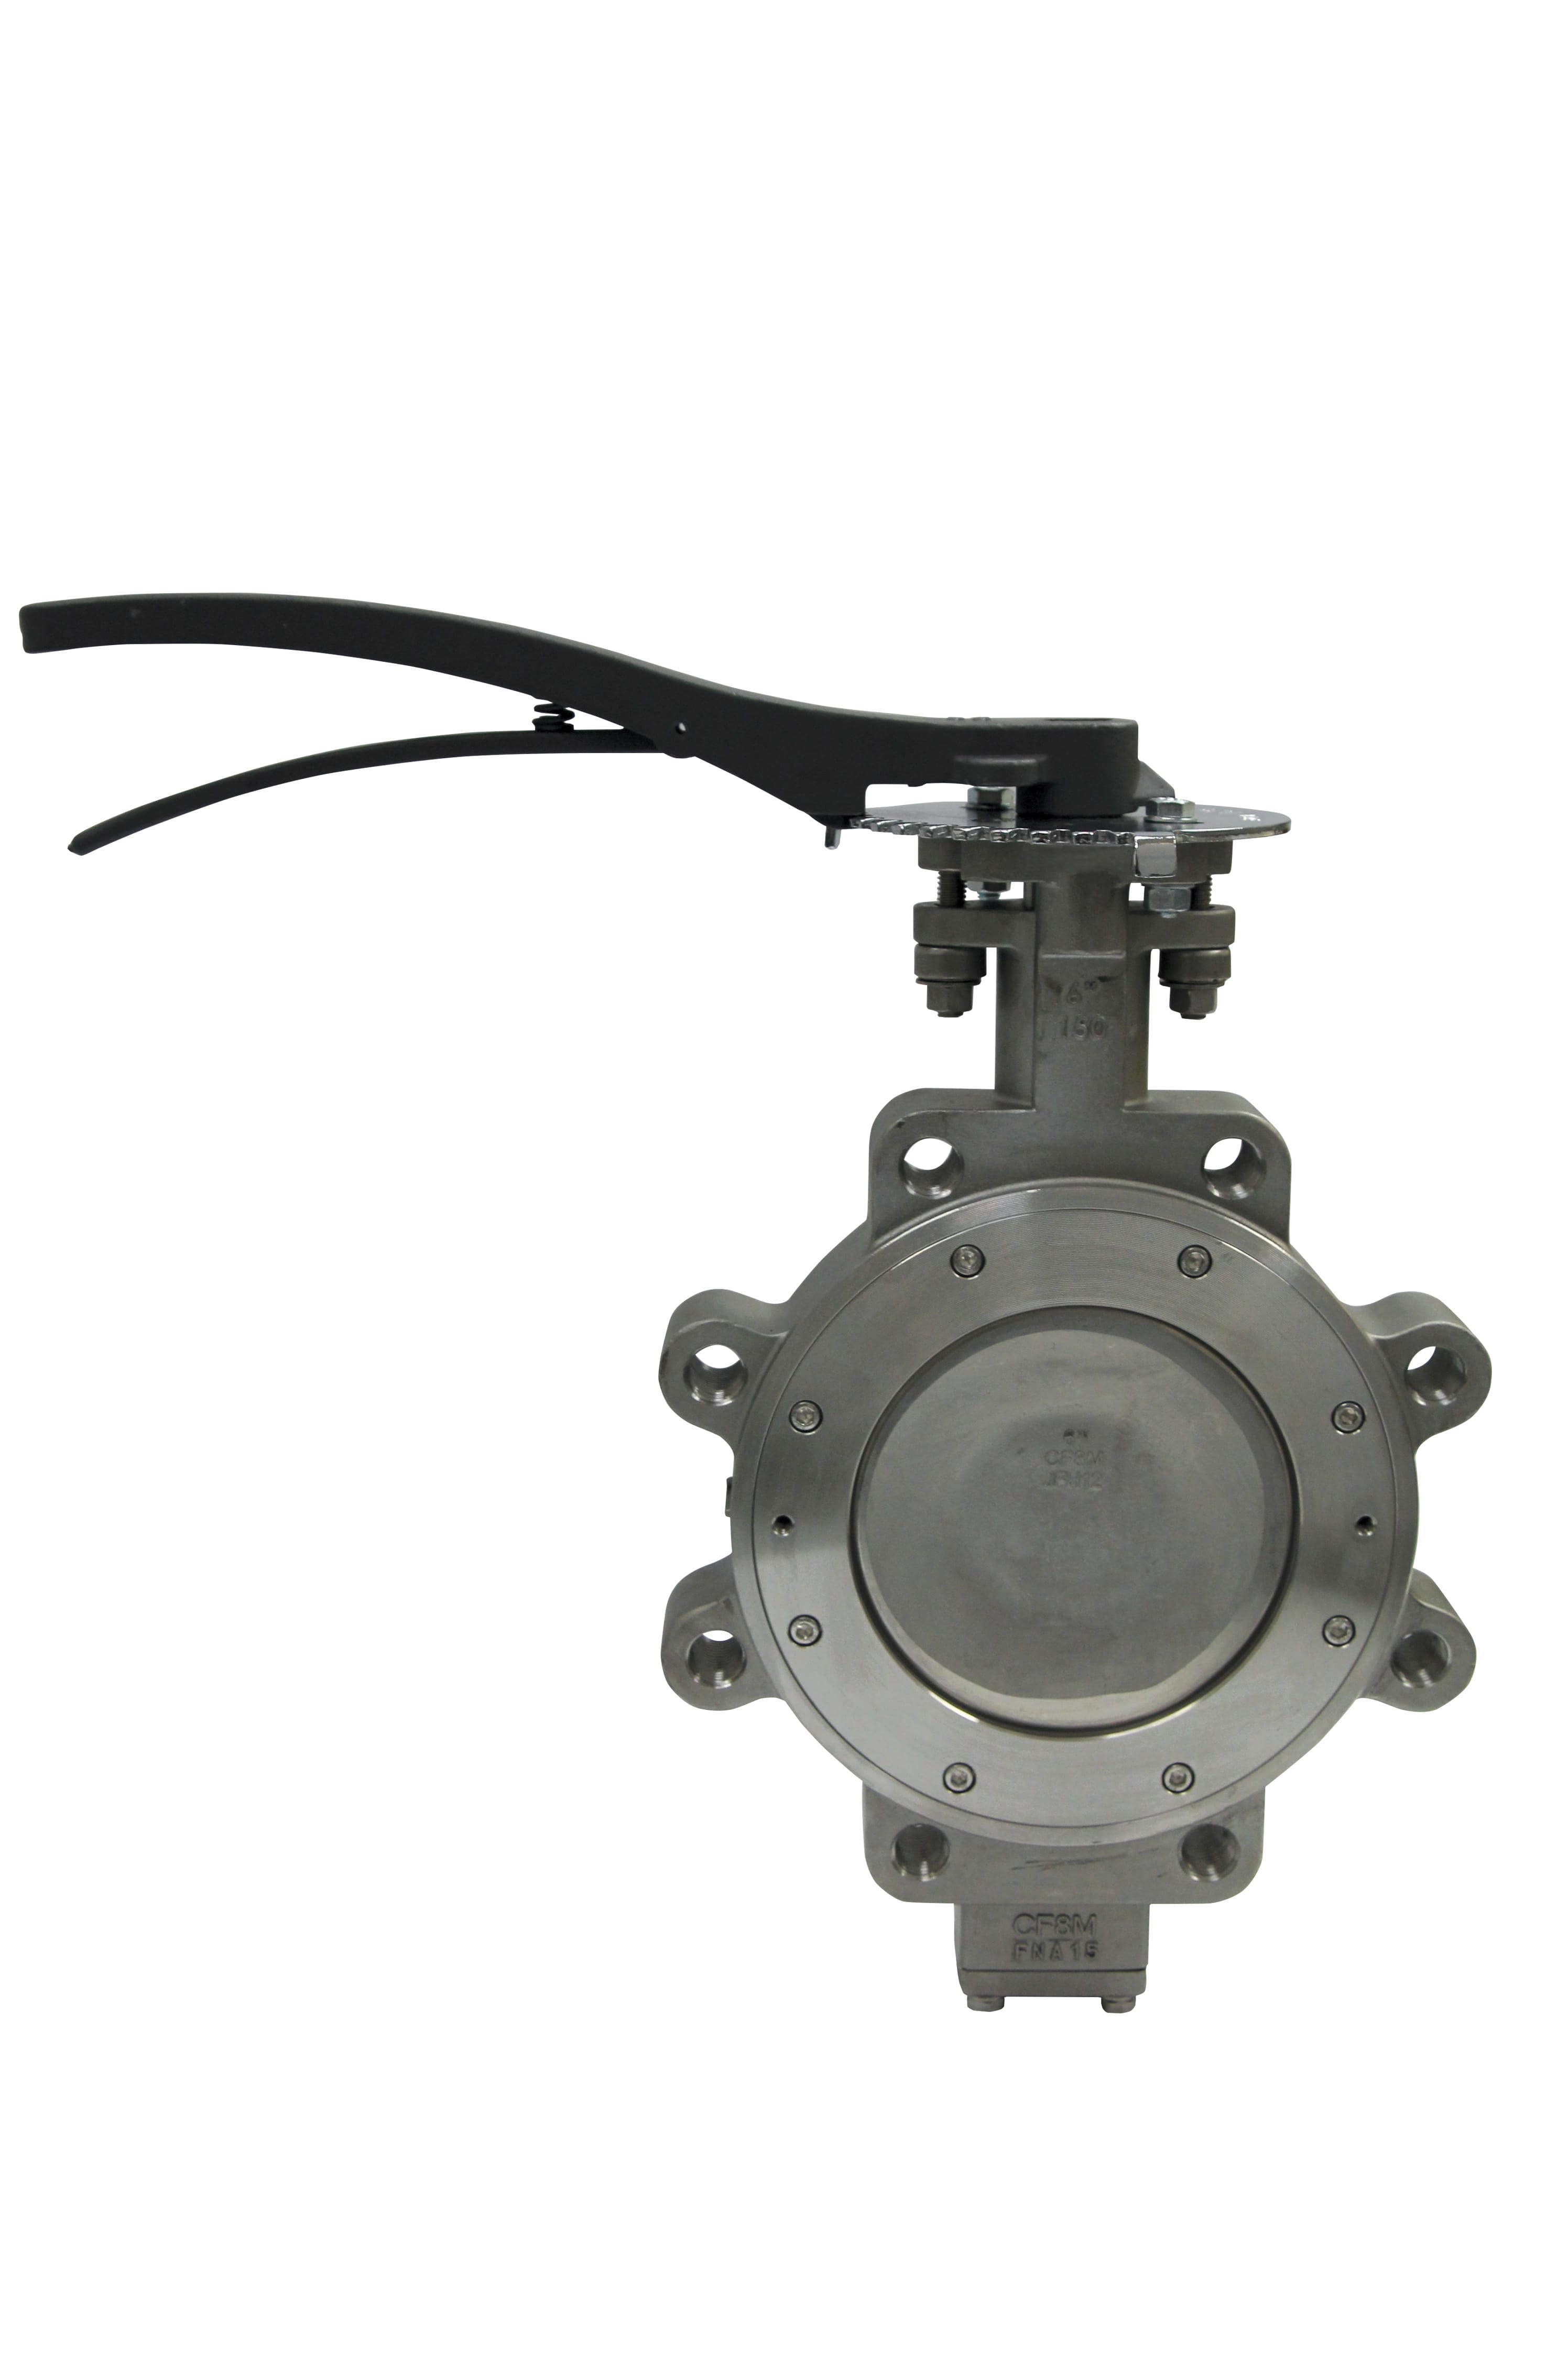 Preview image for Apollo Class 300 Carbon Steel Butterfly Valve with Stainless Steel Disc, 17-4 PH SS Stem & Pin, RTFM Seats, Standard Service, Worm Gear Operator (2 x Lug Type)